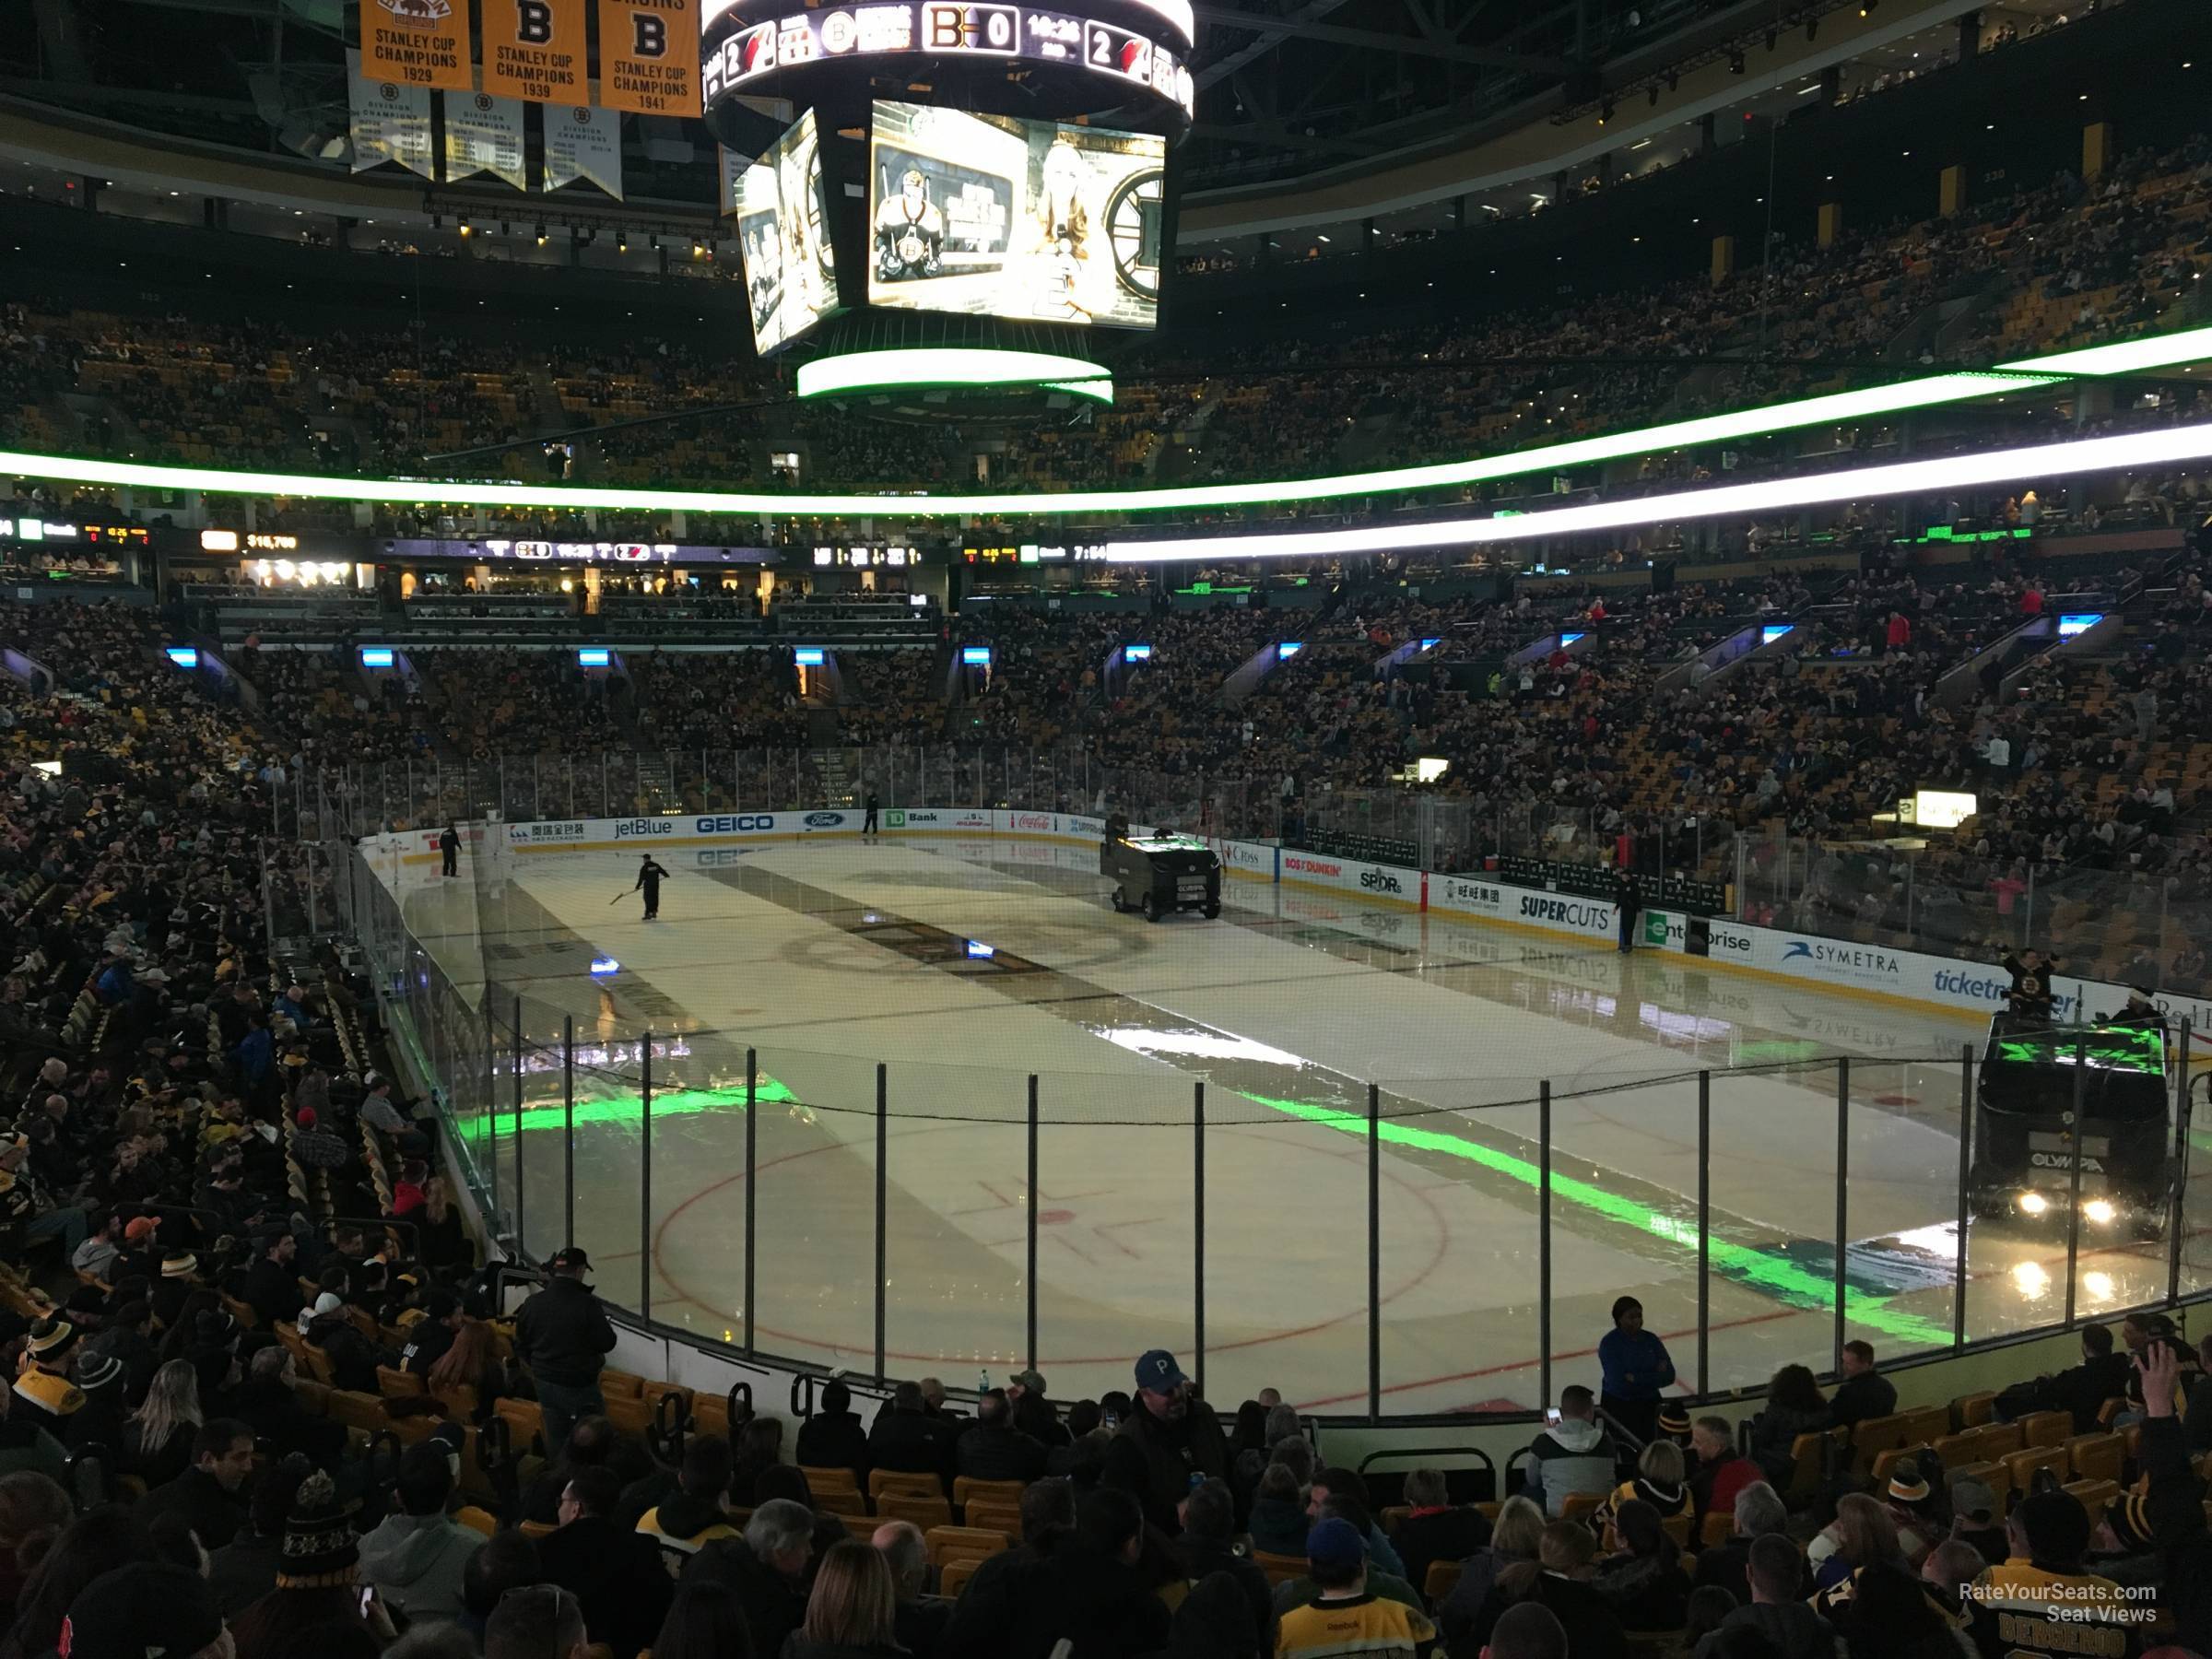 loge 8, row 15 seat view  for hockey - td garden